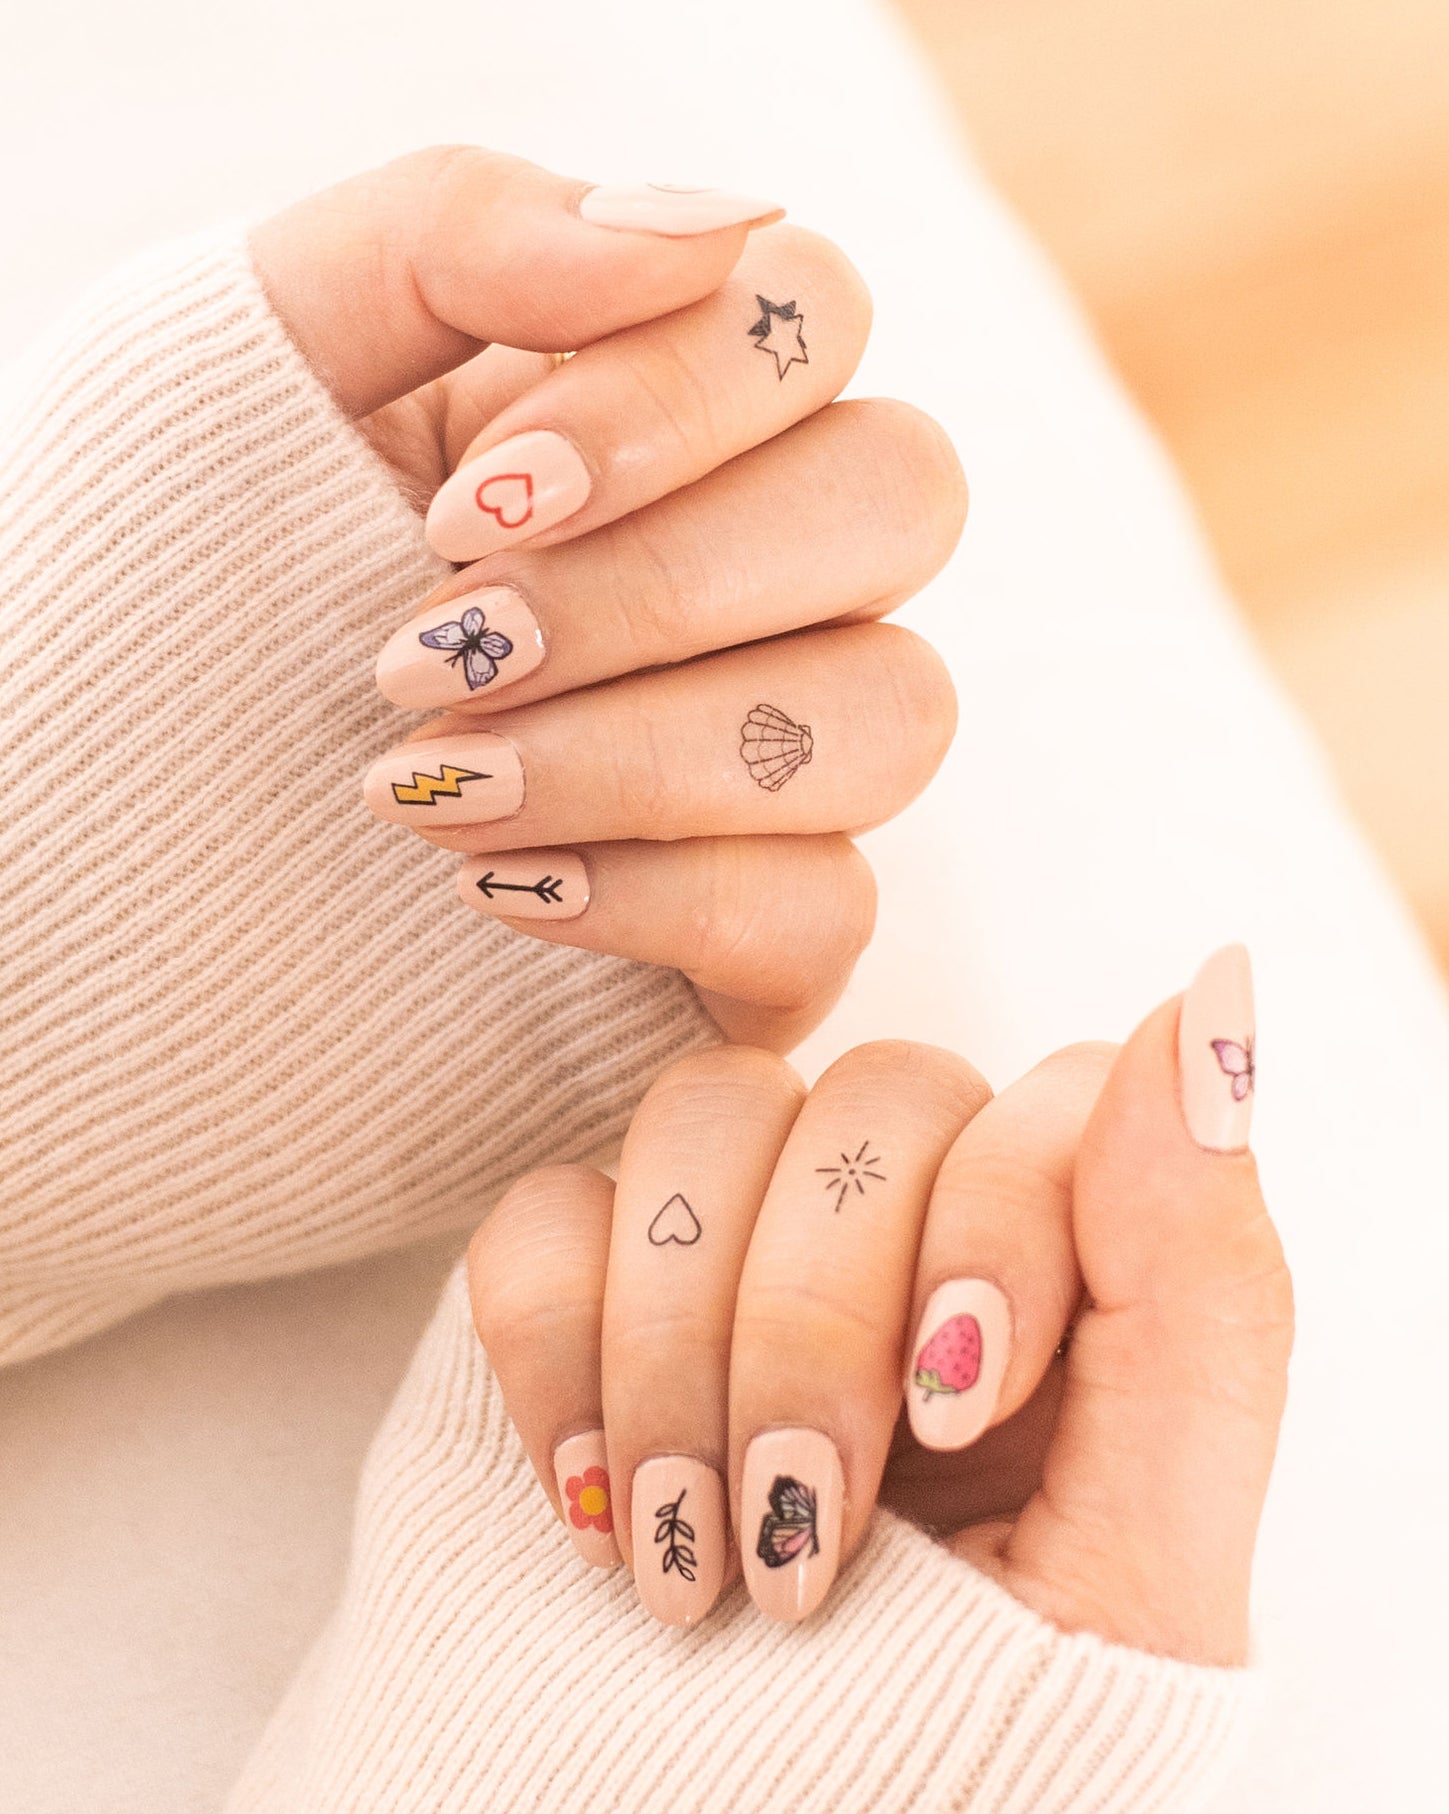 The Nail Art Collection